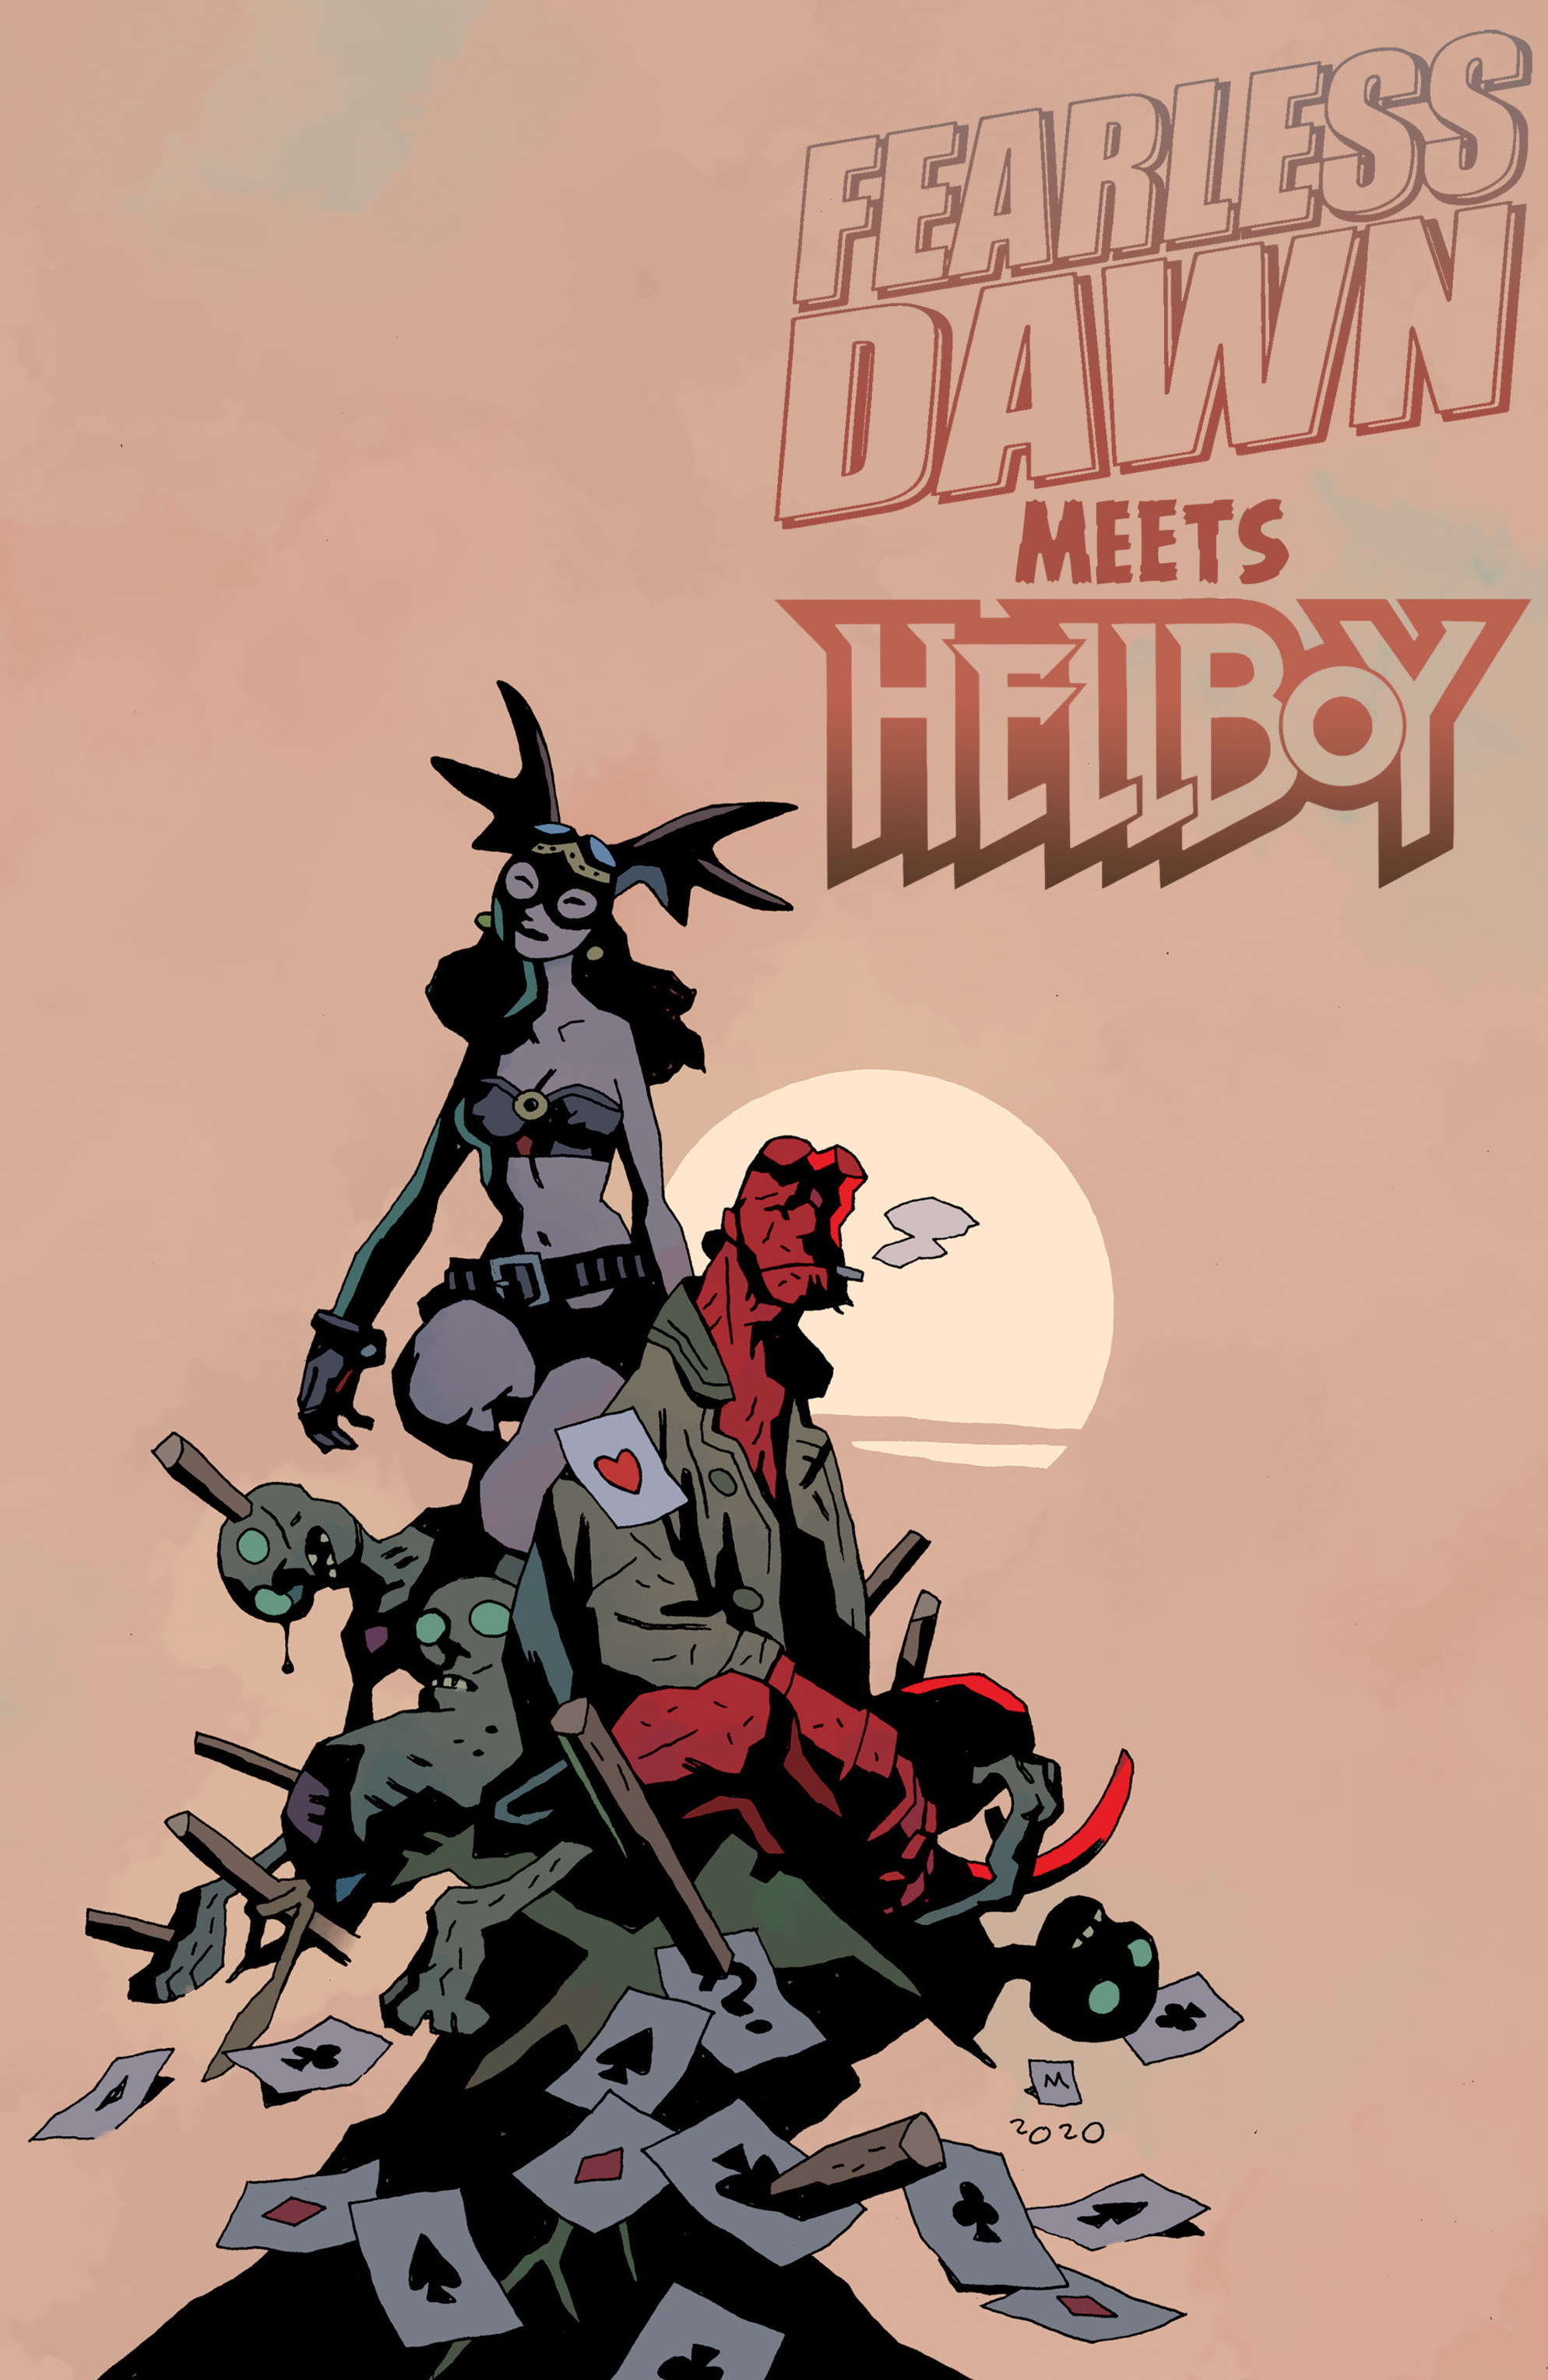 Fearless Dawn Meets Hellboy (2020): Chapter 1 - Page 1